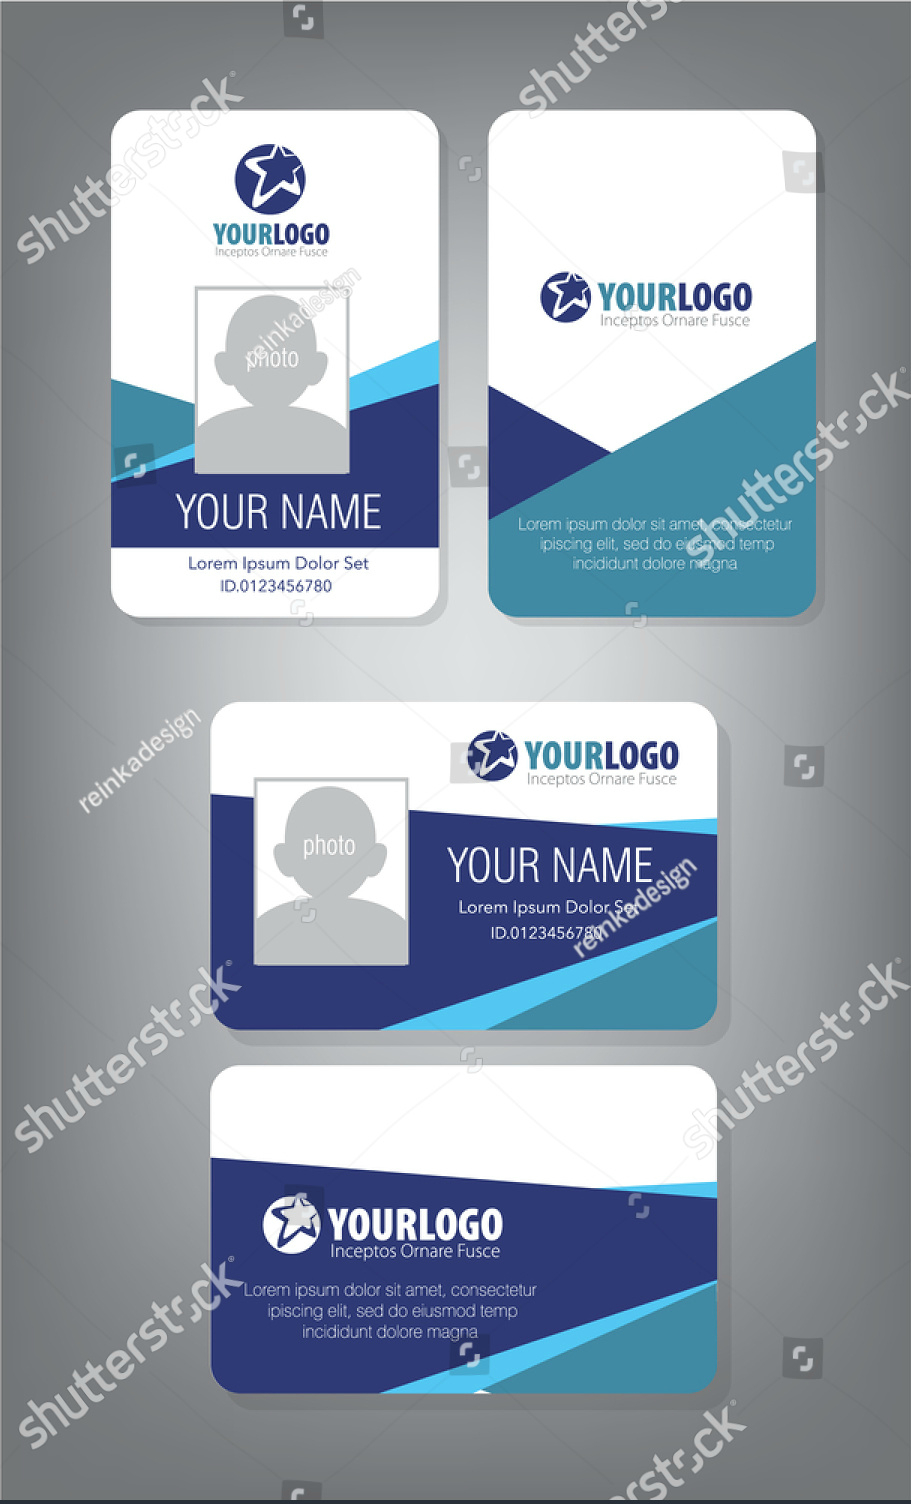 43+ Professional Id Card Designs - Psd, Eps, Ai, Word | Free Intended For Portrait Id Card Template